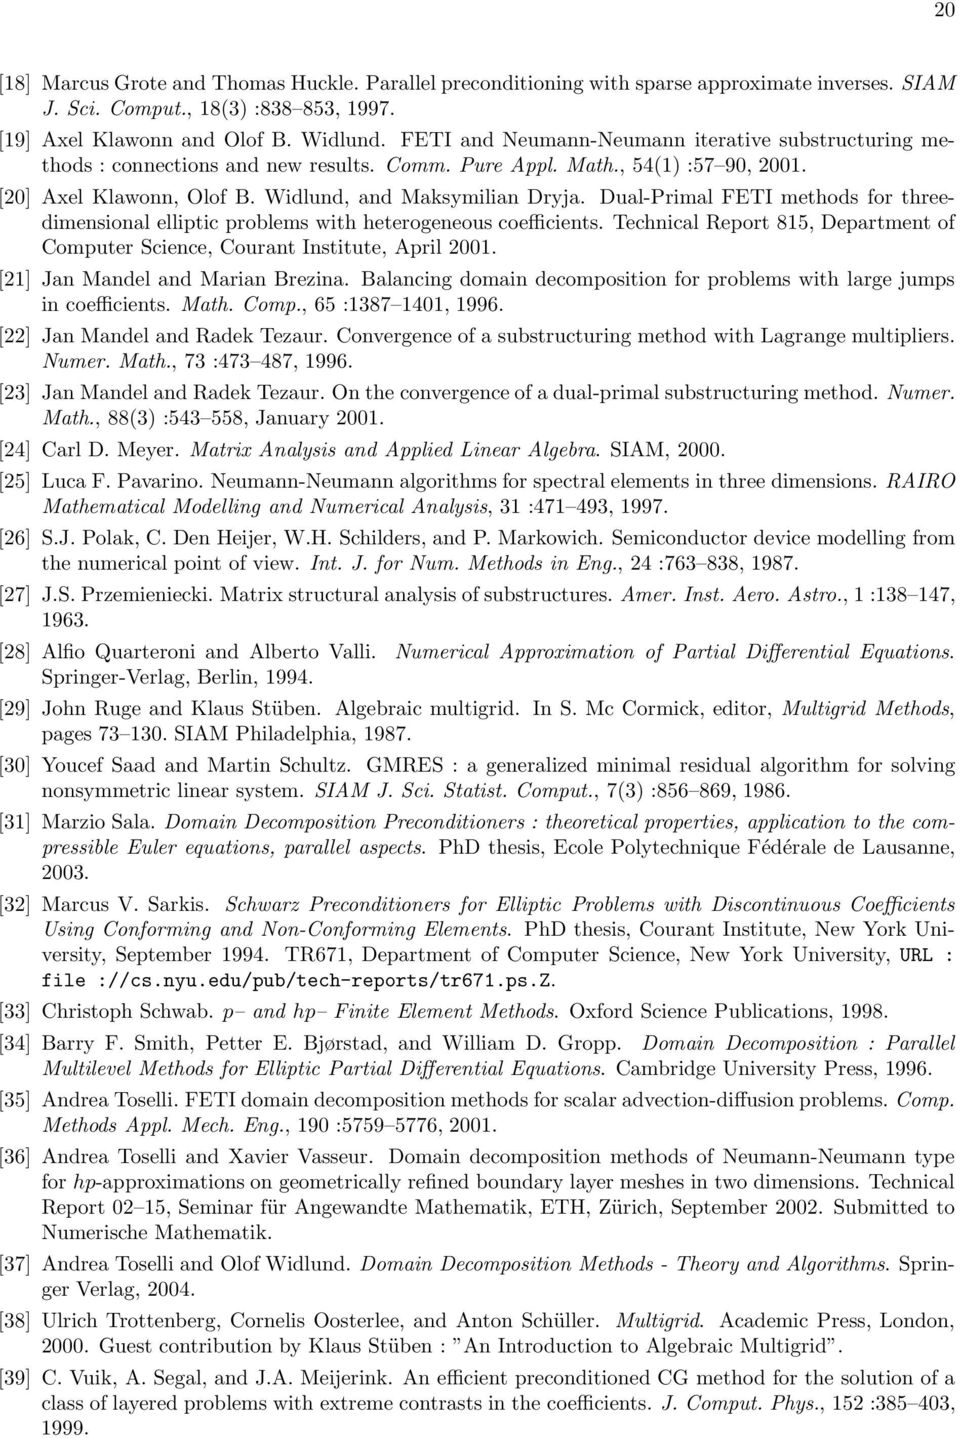 Dual-Primal FETI methods for threedimensional elliptic problems with heterogeneous coefficients. Technical Report 815, Department of Computer Science, Courant Institute, April 2001.